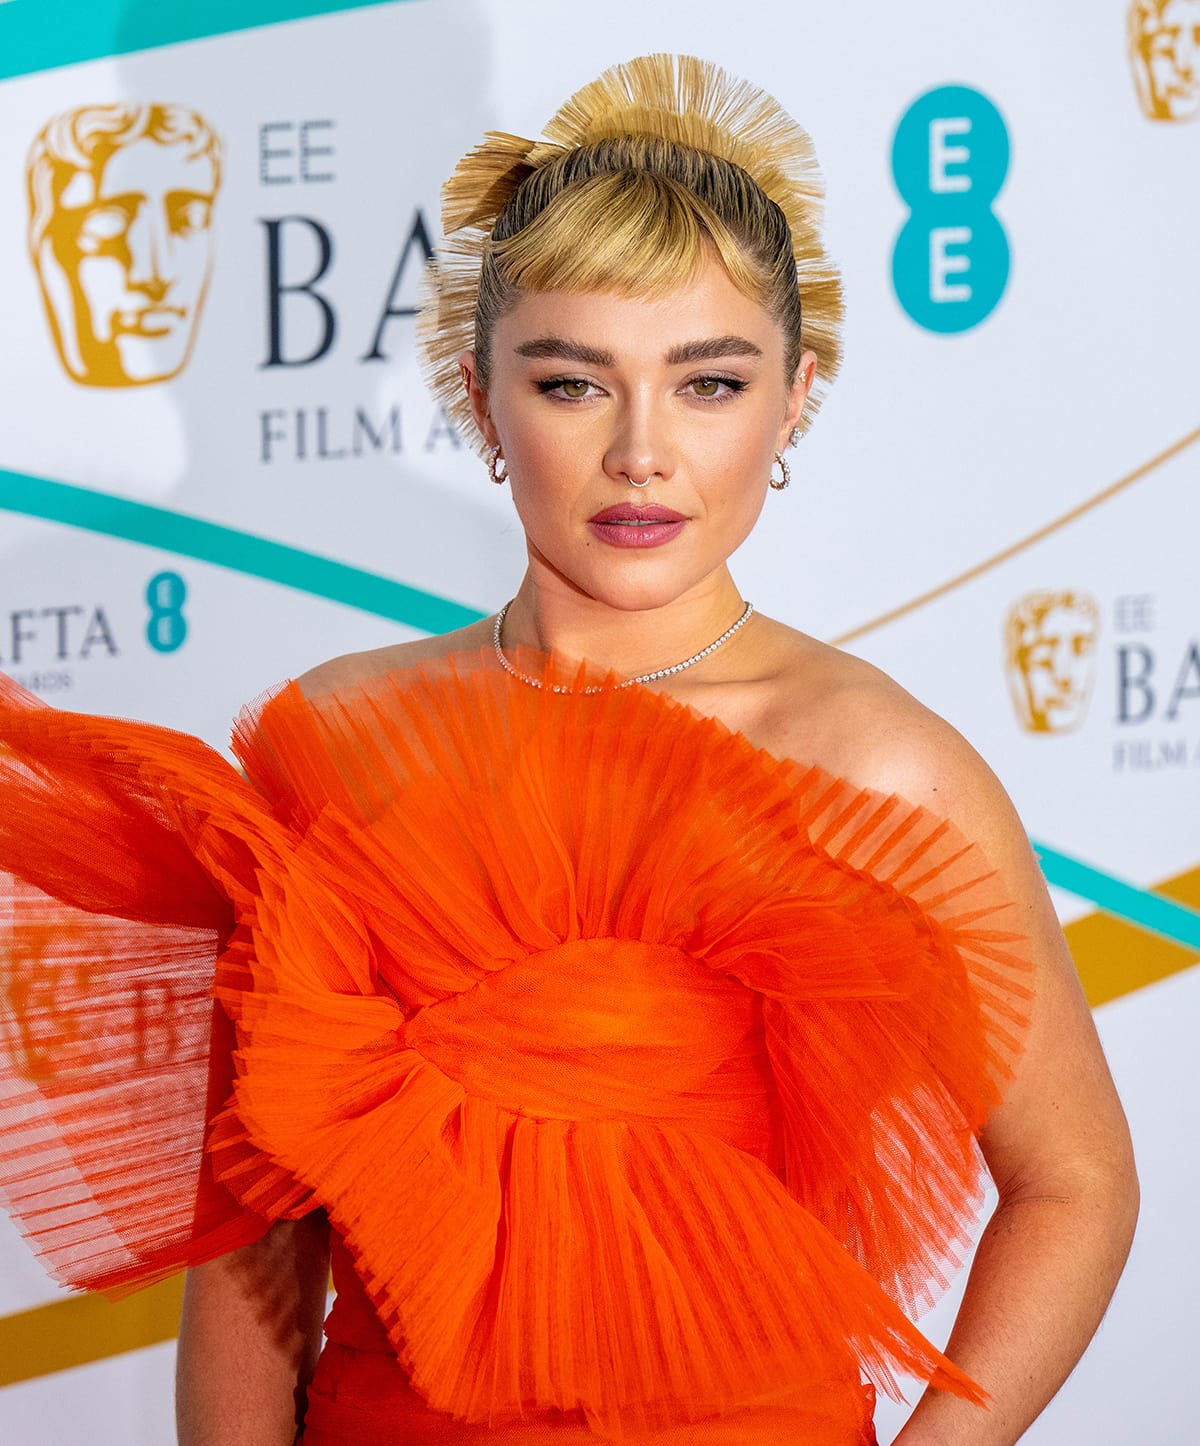 Florence Pugh coordinates her glam with her gown by wearing a fanned-out updo and Audrey Hepburn-inspired brushed up brows